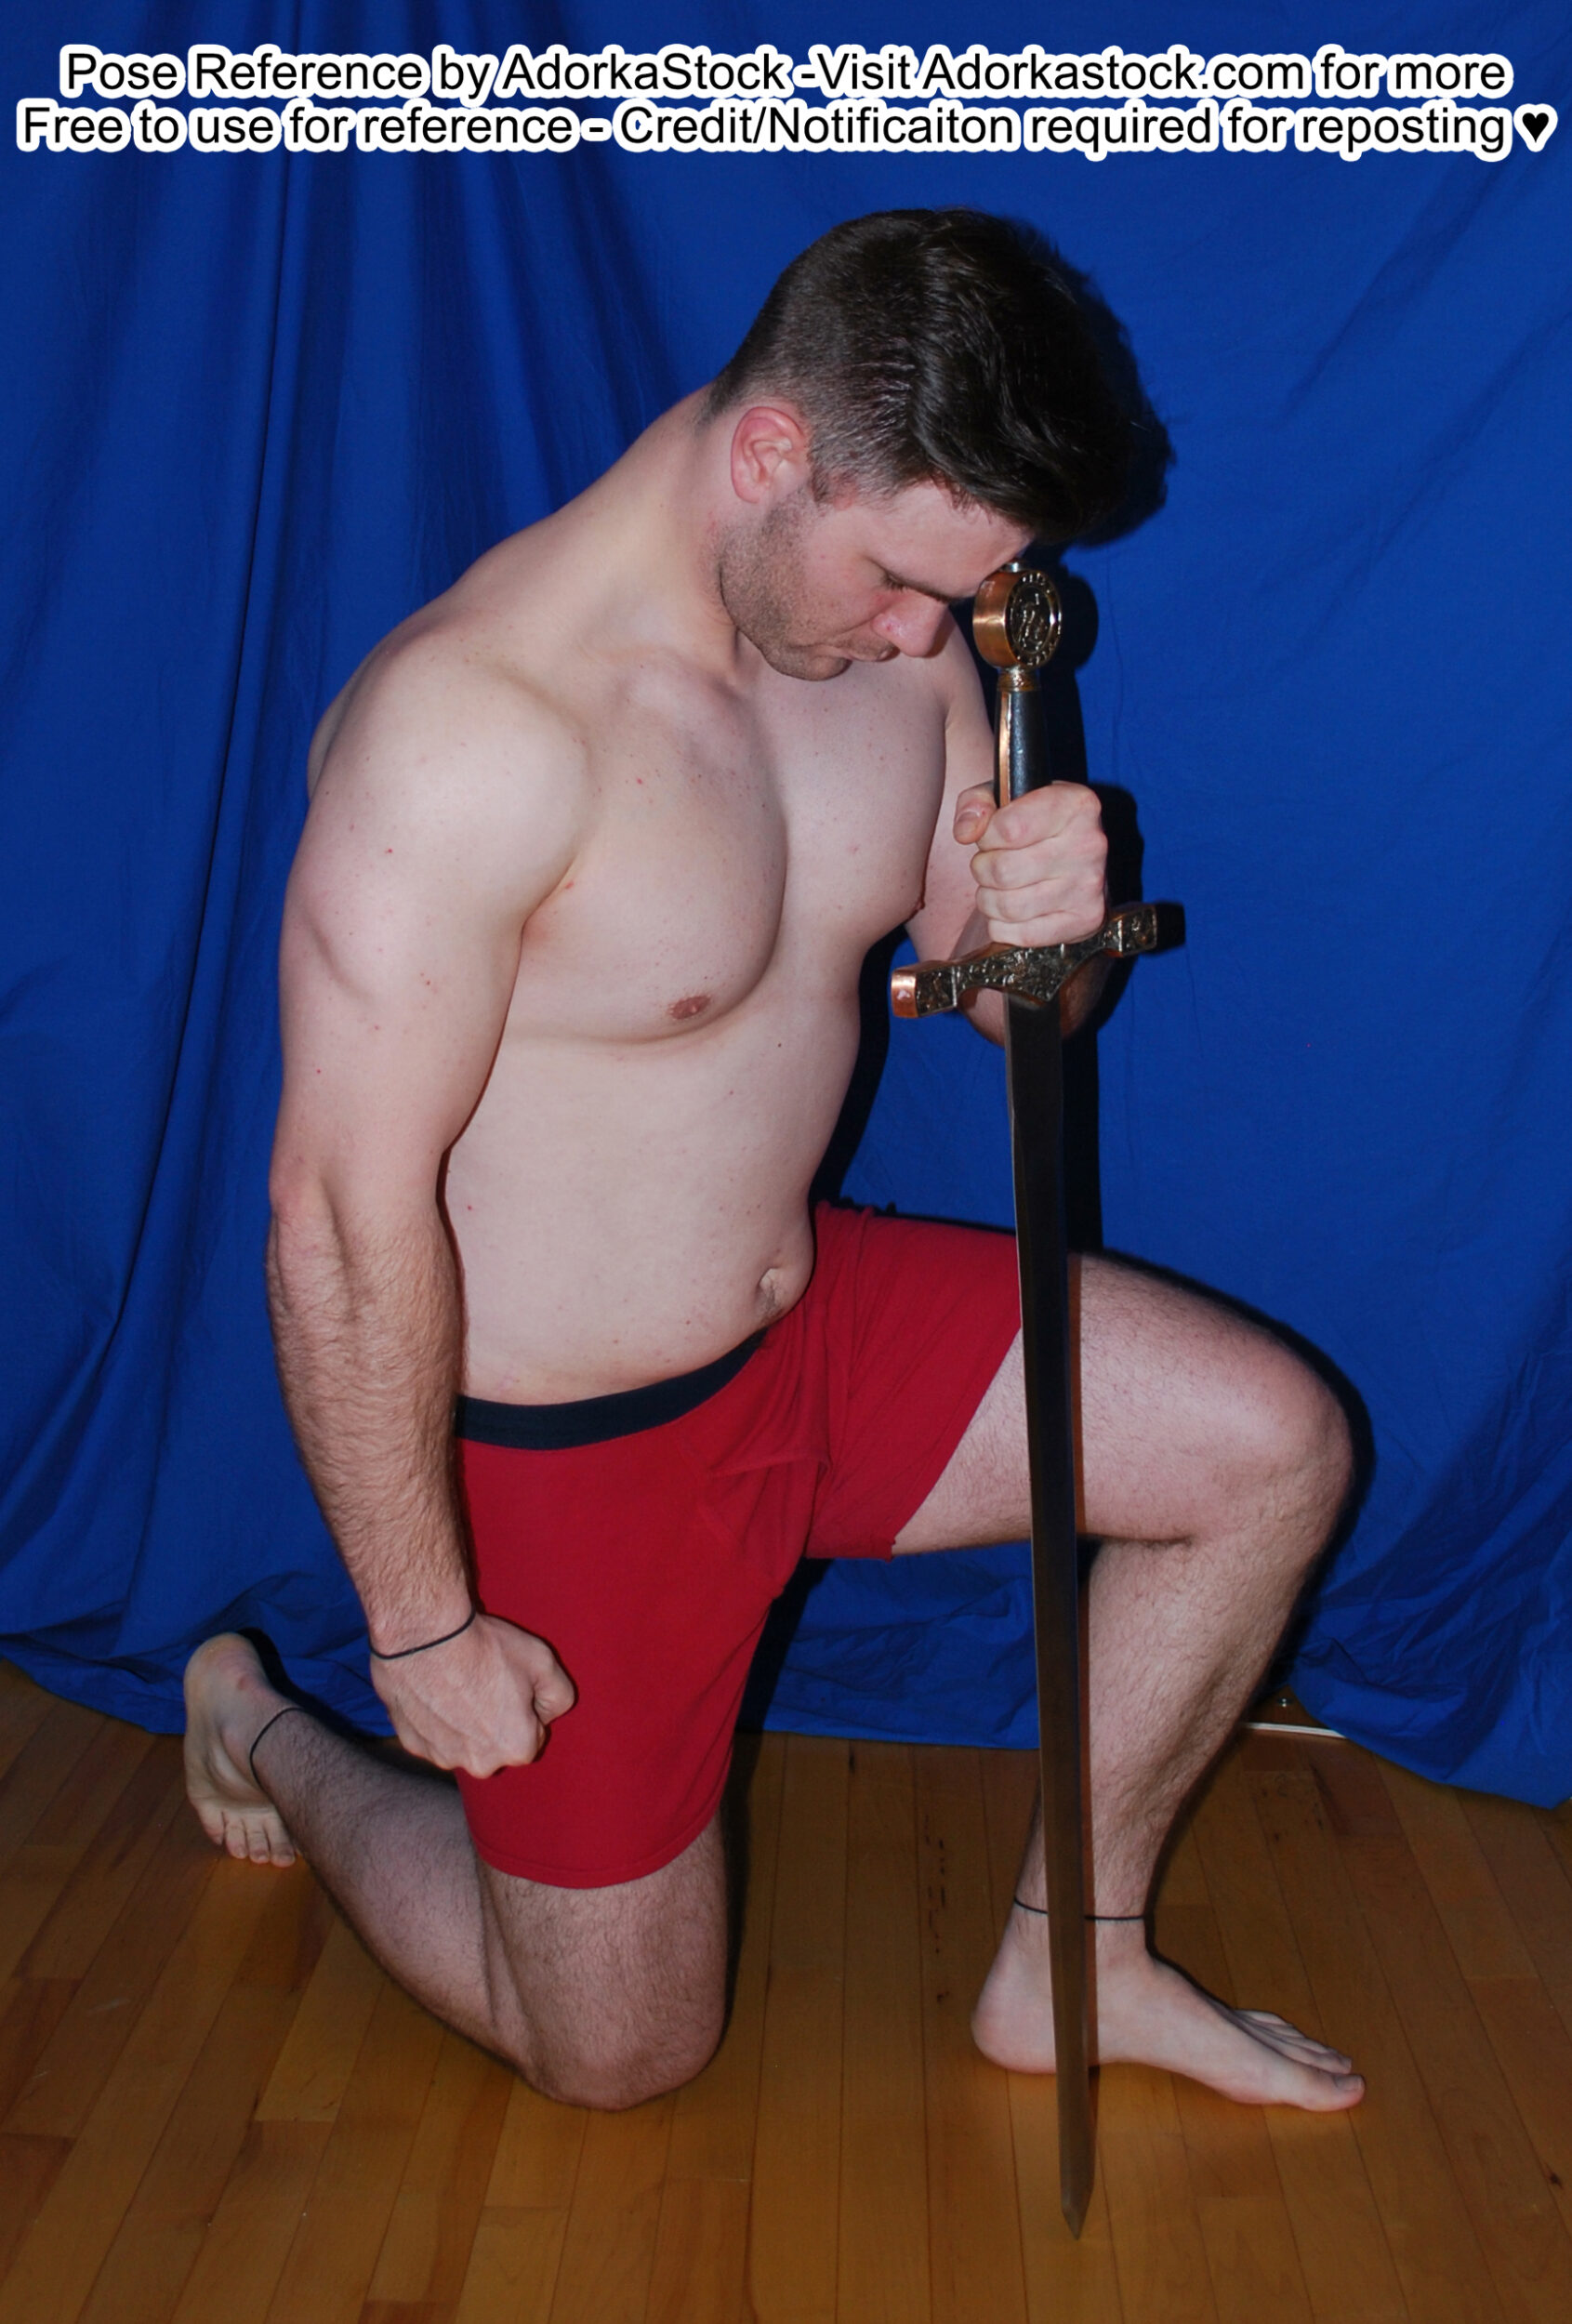 Kneeling male pose reference with head resting on hilt of sword